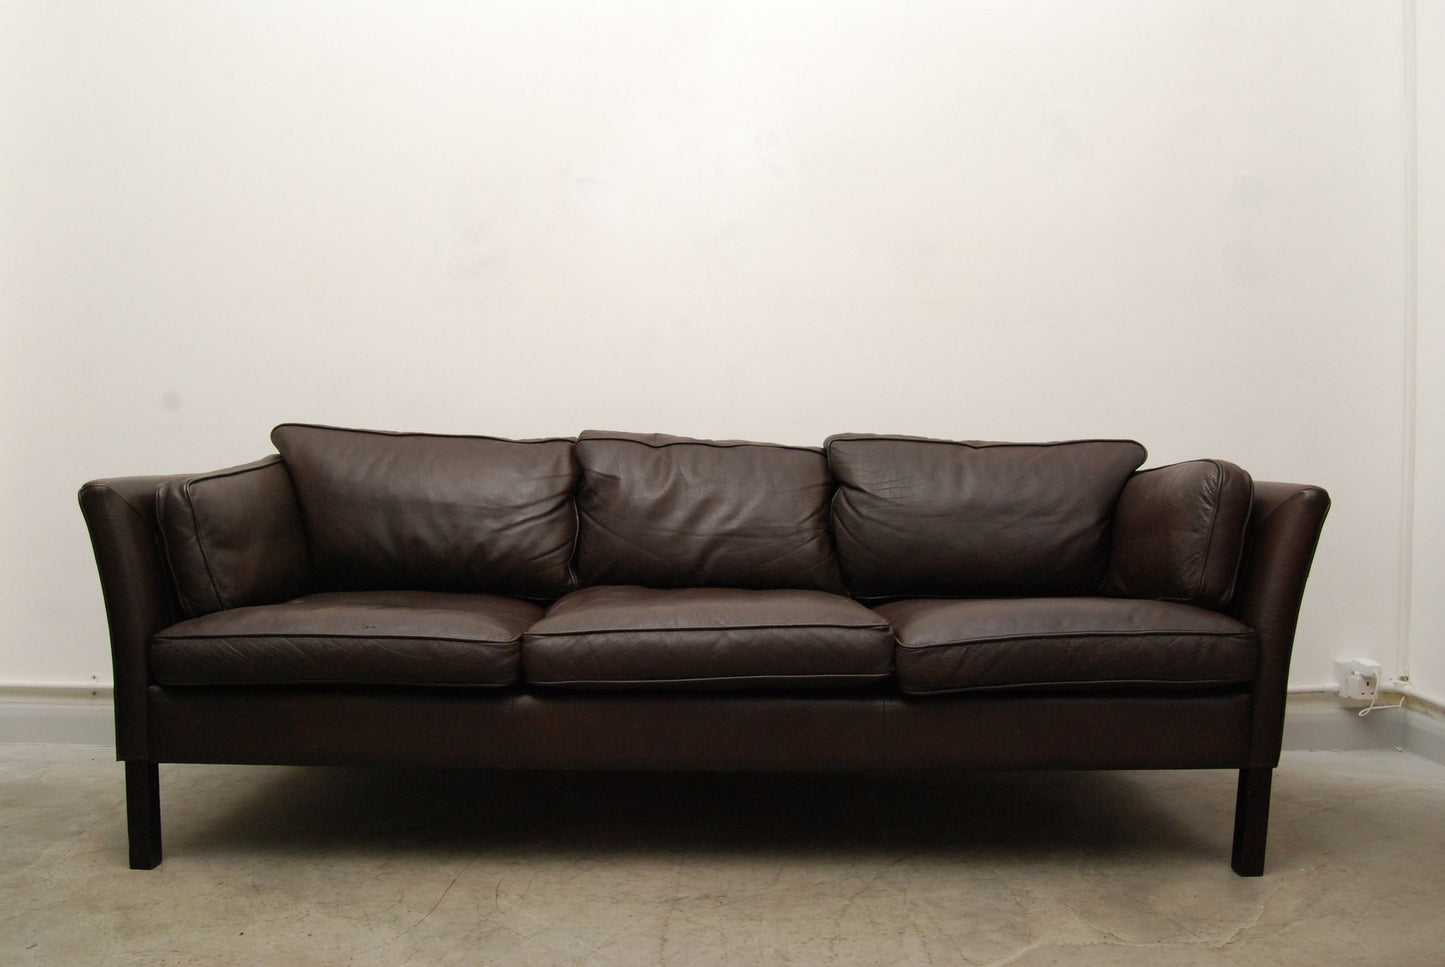 Three seat sofa by Stouby (dark brown)